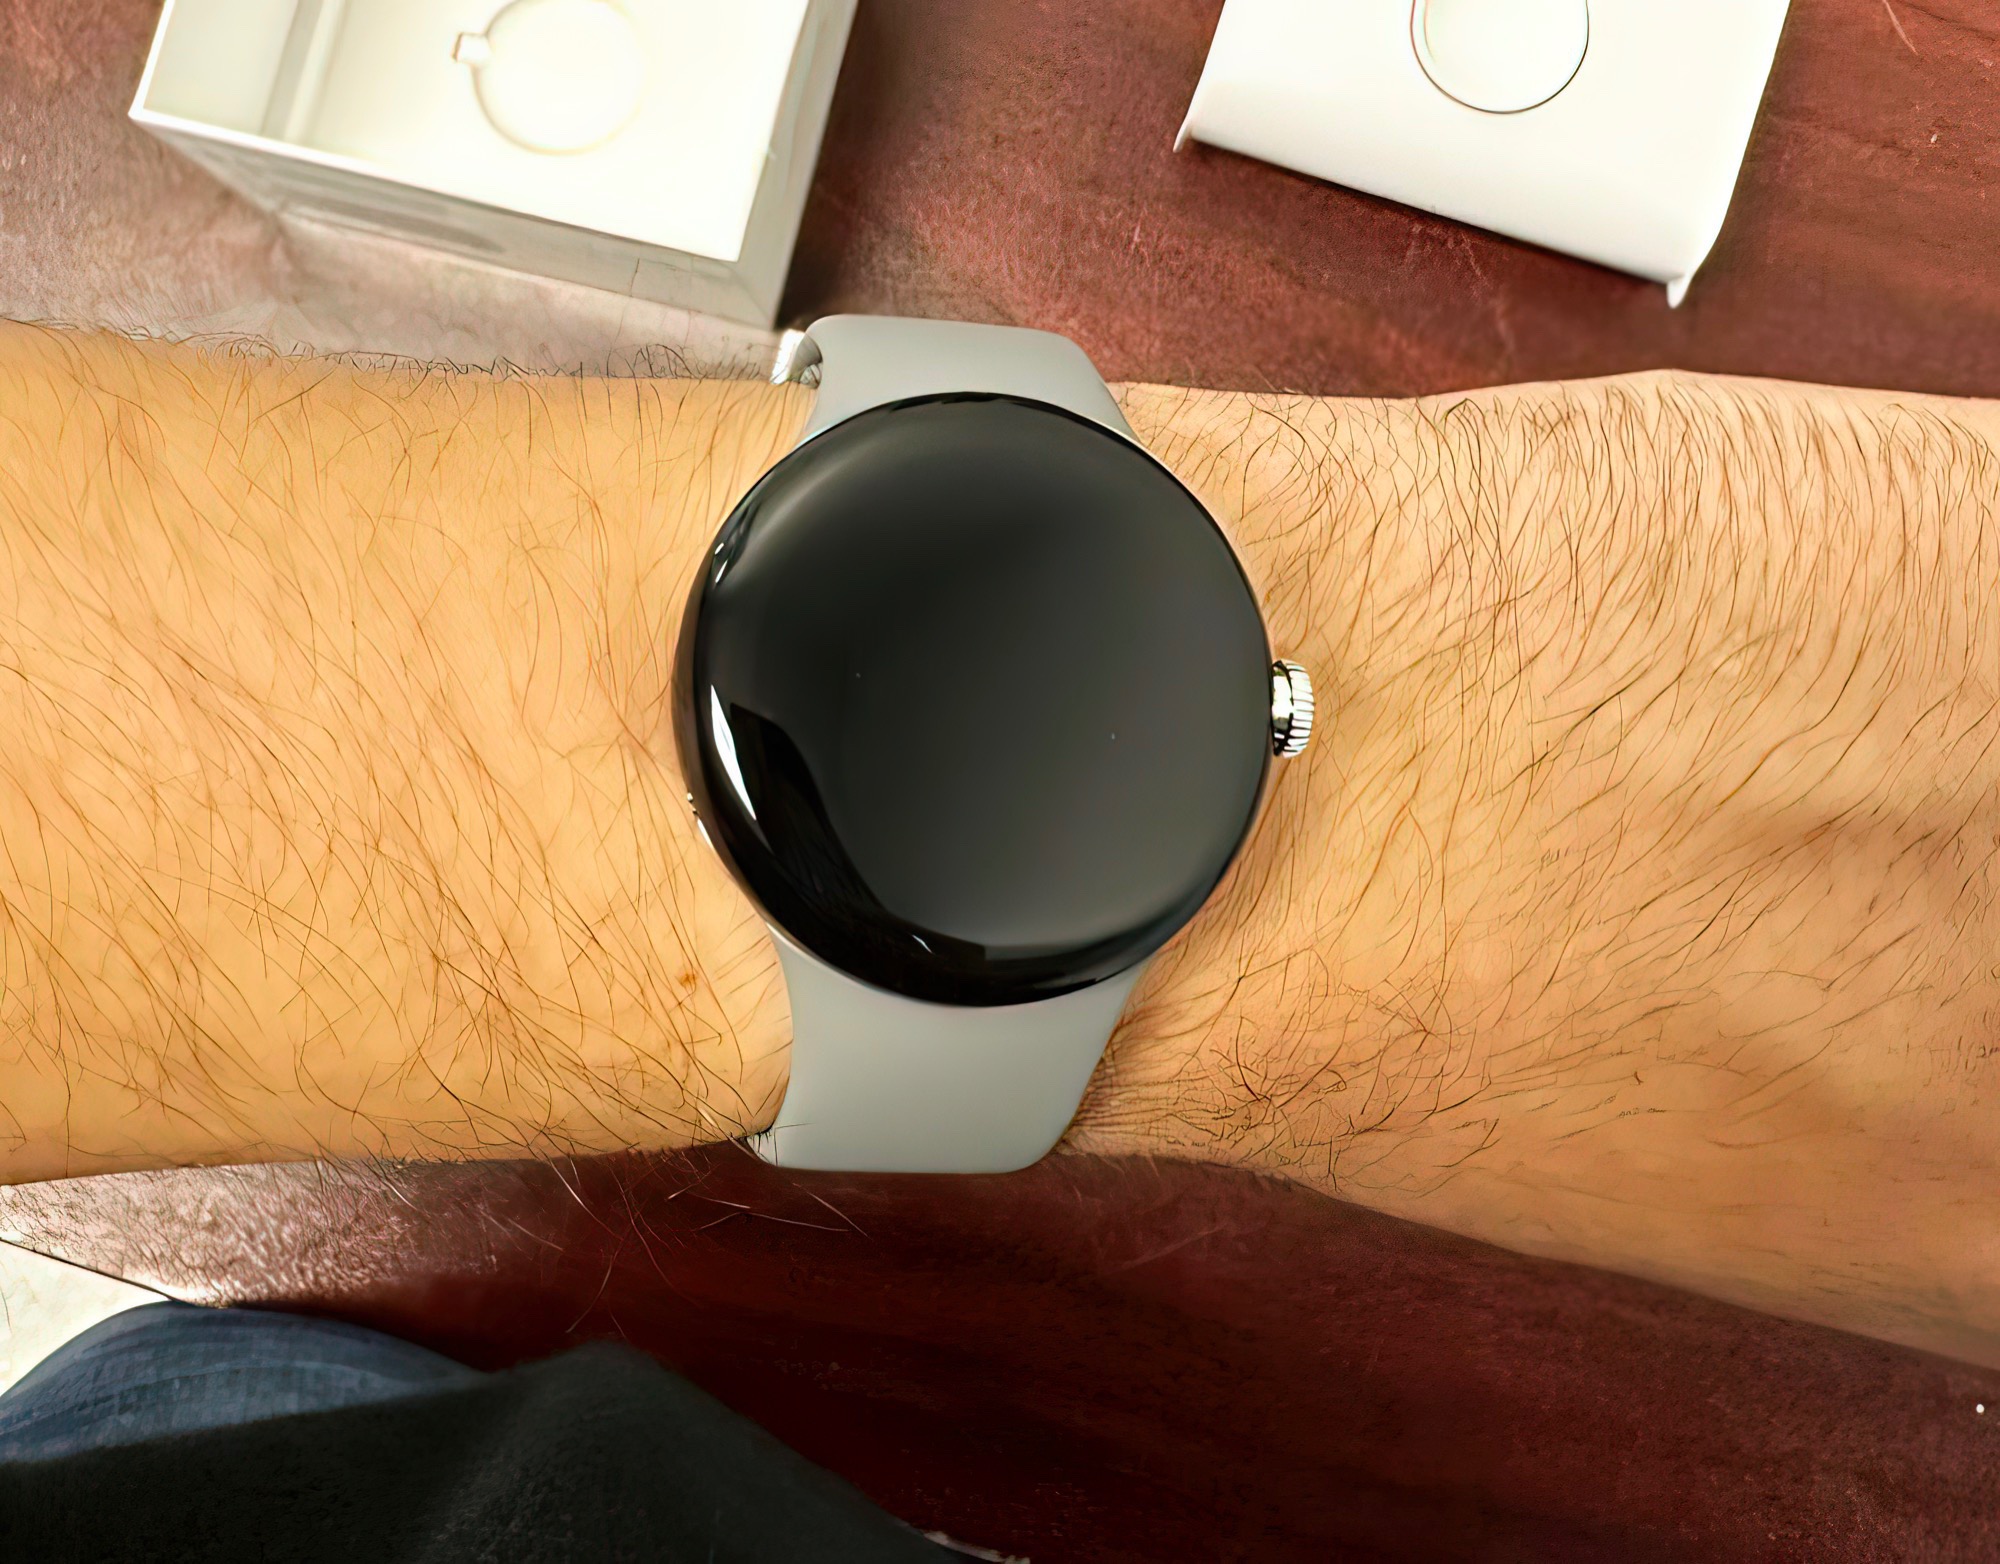 watch show NotebookCheck.net - News as band prices leak thick bezels Unboxing display photos Pixel Watch: Google